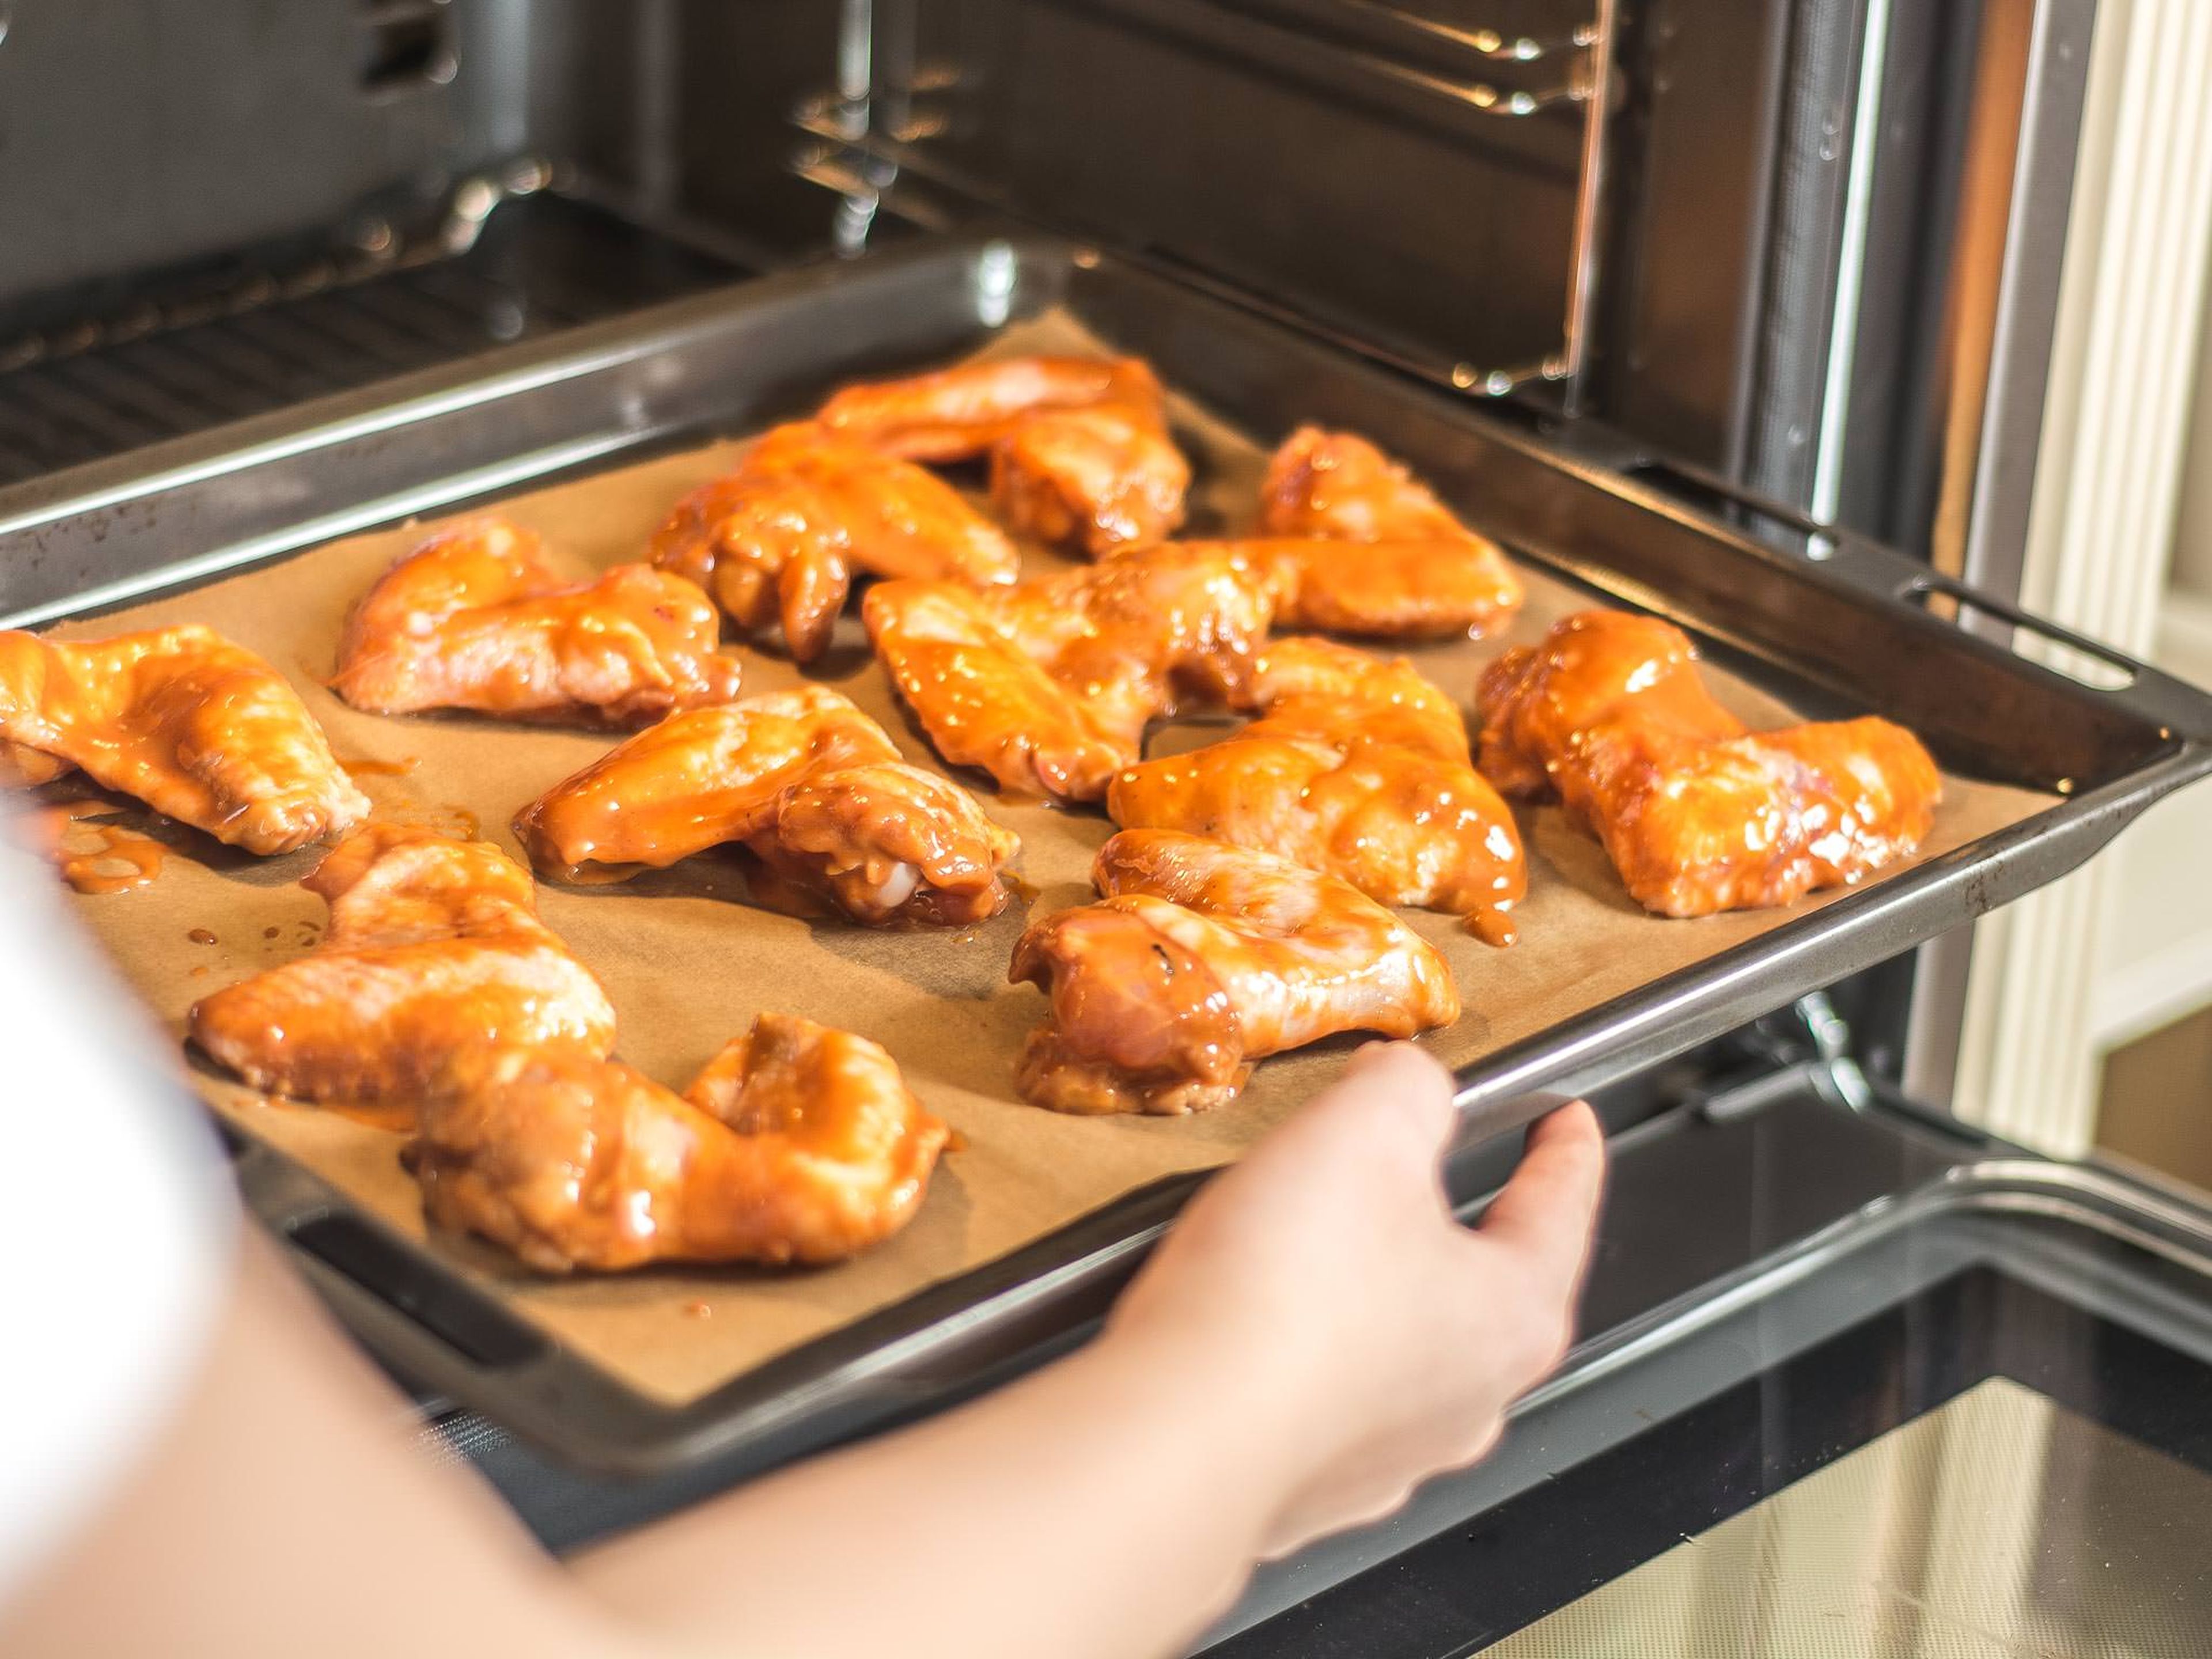 Bake in a preheated oven at 180°C/355°F for approx. 30 min until golden. Turn the wings after 15 min., so that they can brown evenly on both sides. Serve with a variety of dips, as desired.